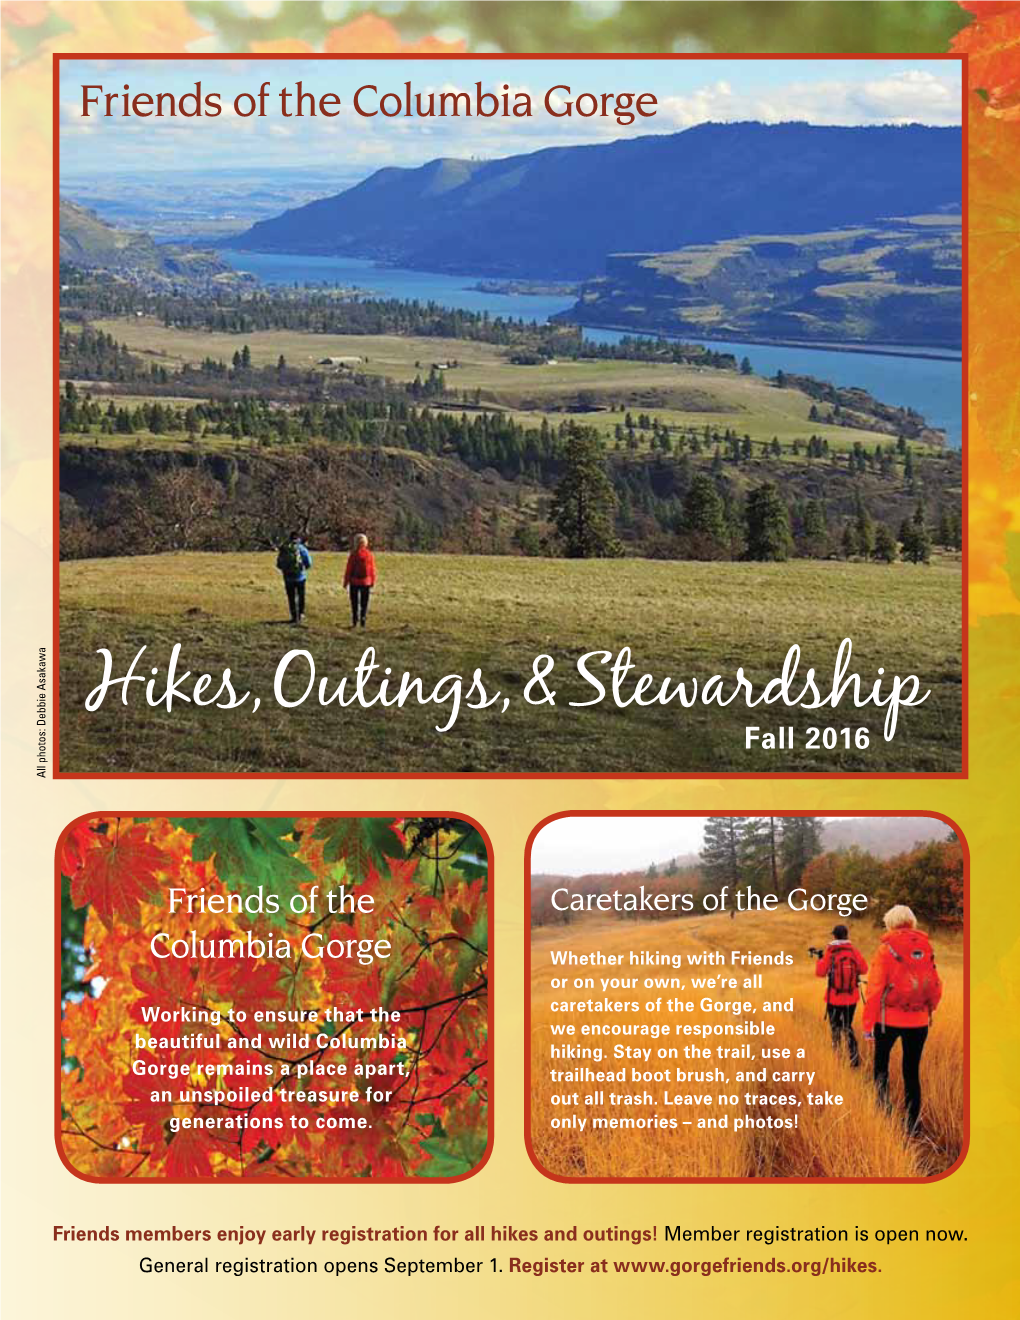 Hikes, Outings, & Stewardship